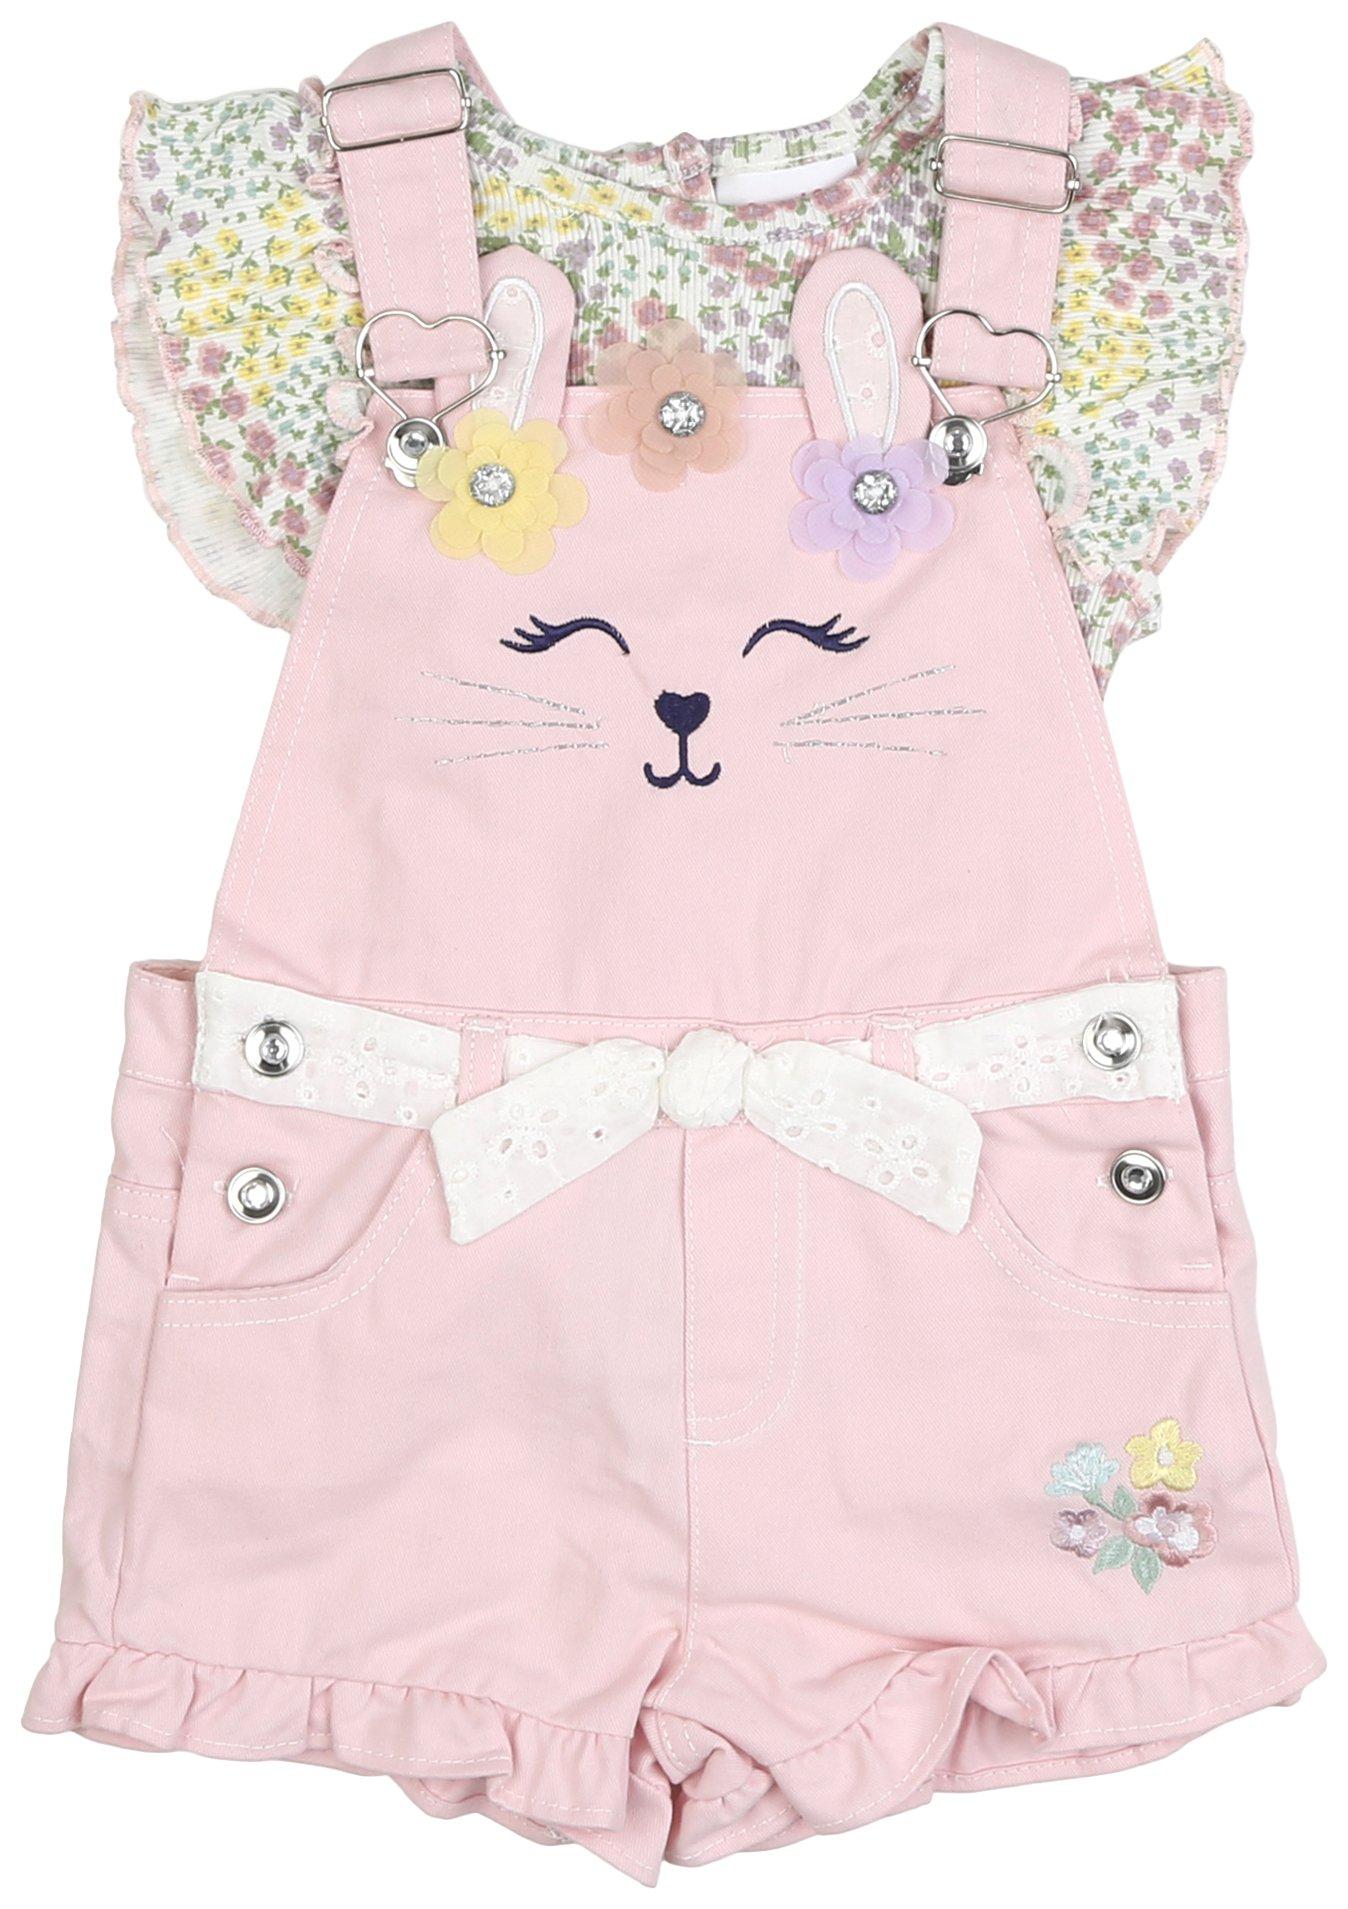 Toddler Girls 2 pc. Bunny Overall Jumper Set